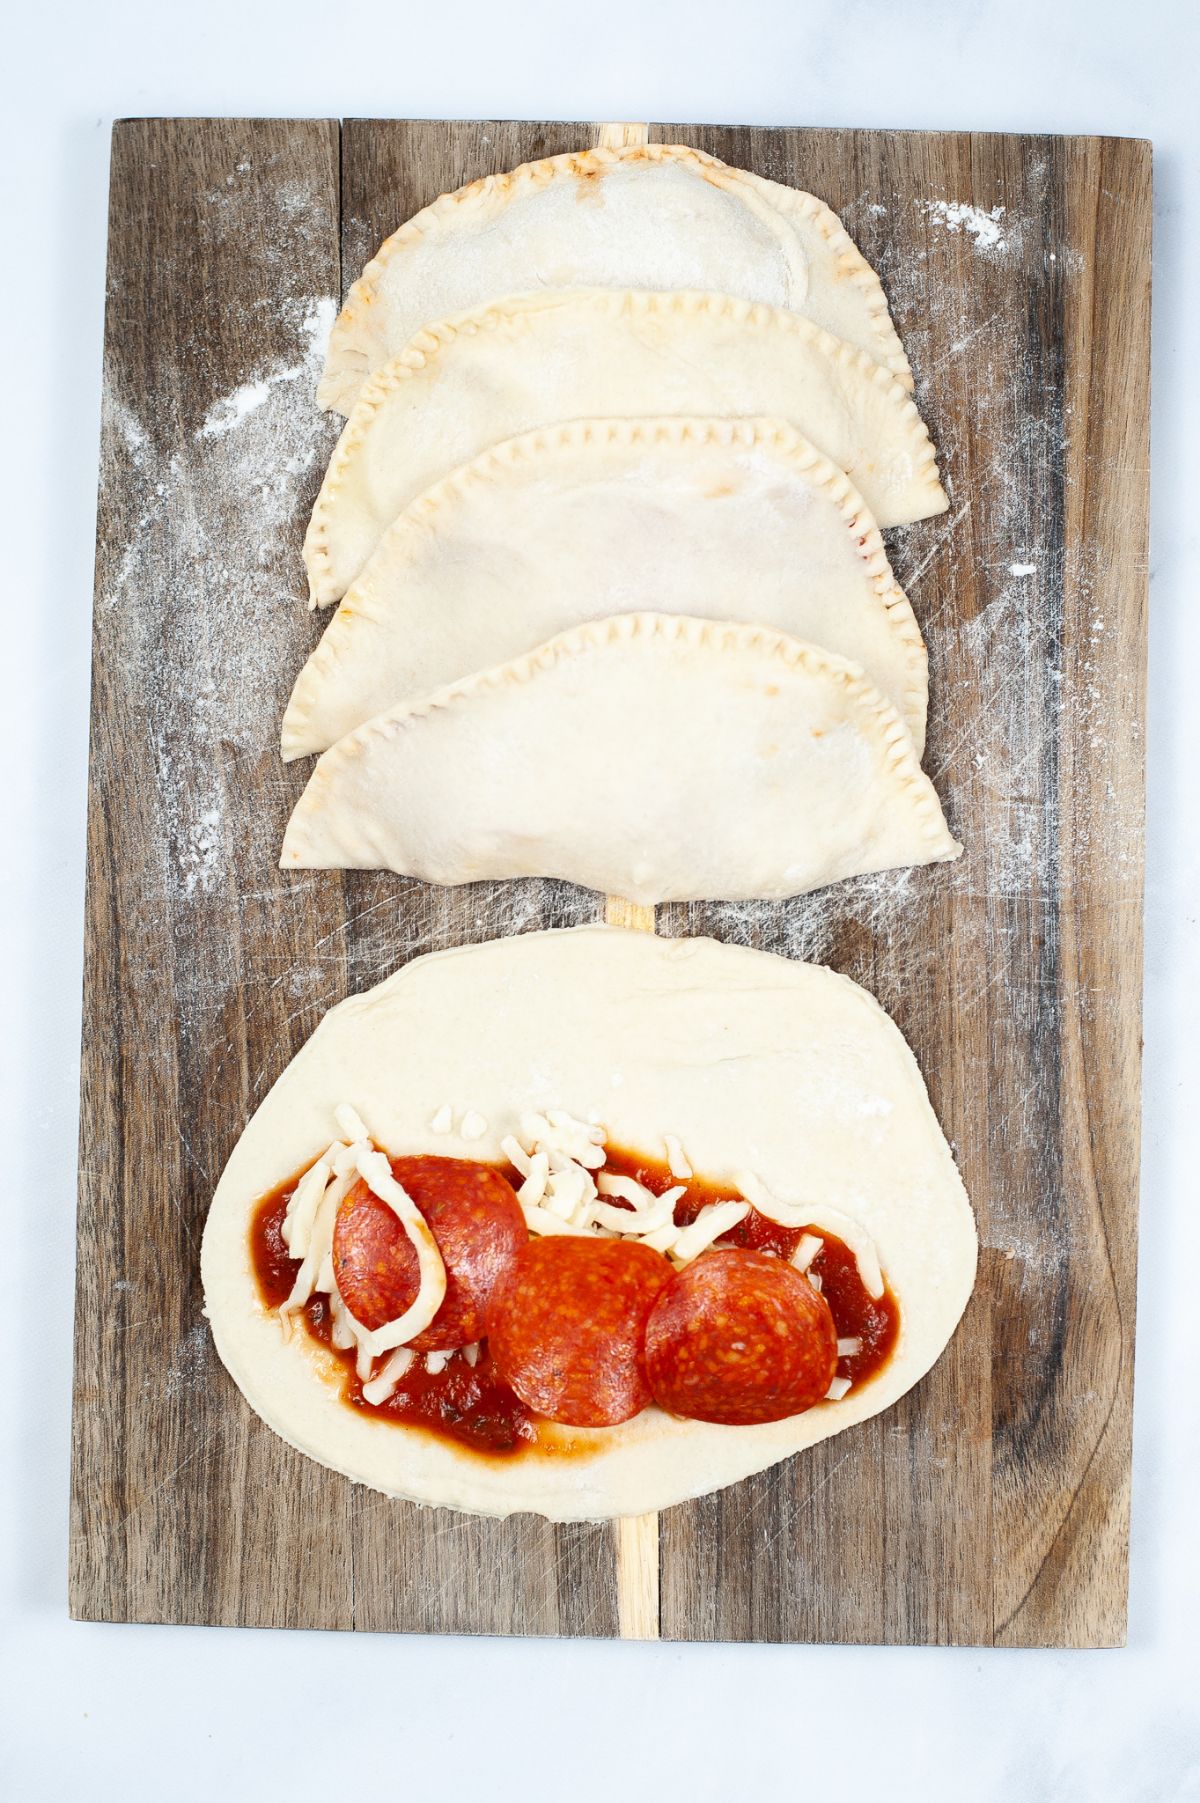 4 assembled calzones on top of a wooden board with the 5th one still open, showing the pizza sauce, cheese, and pepperoni filling.